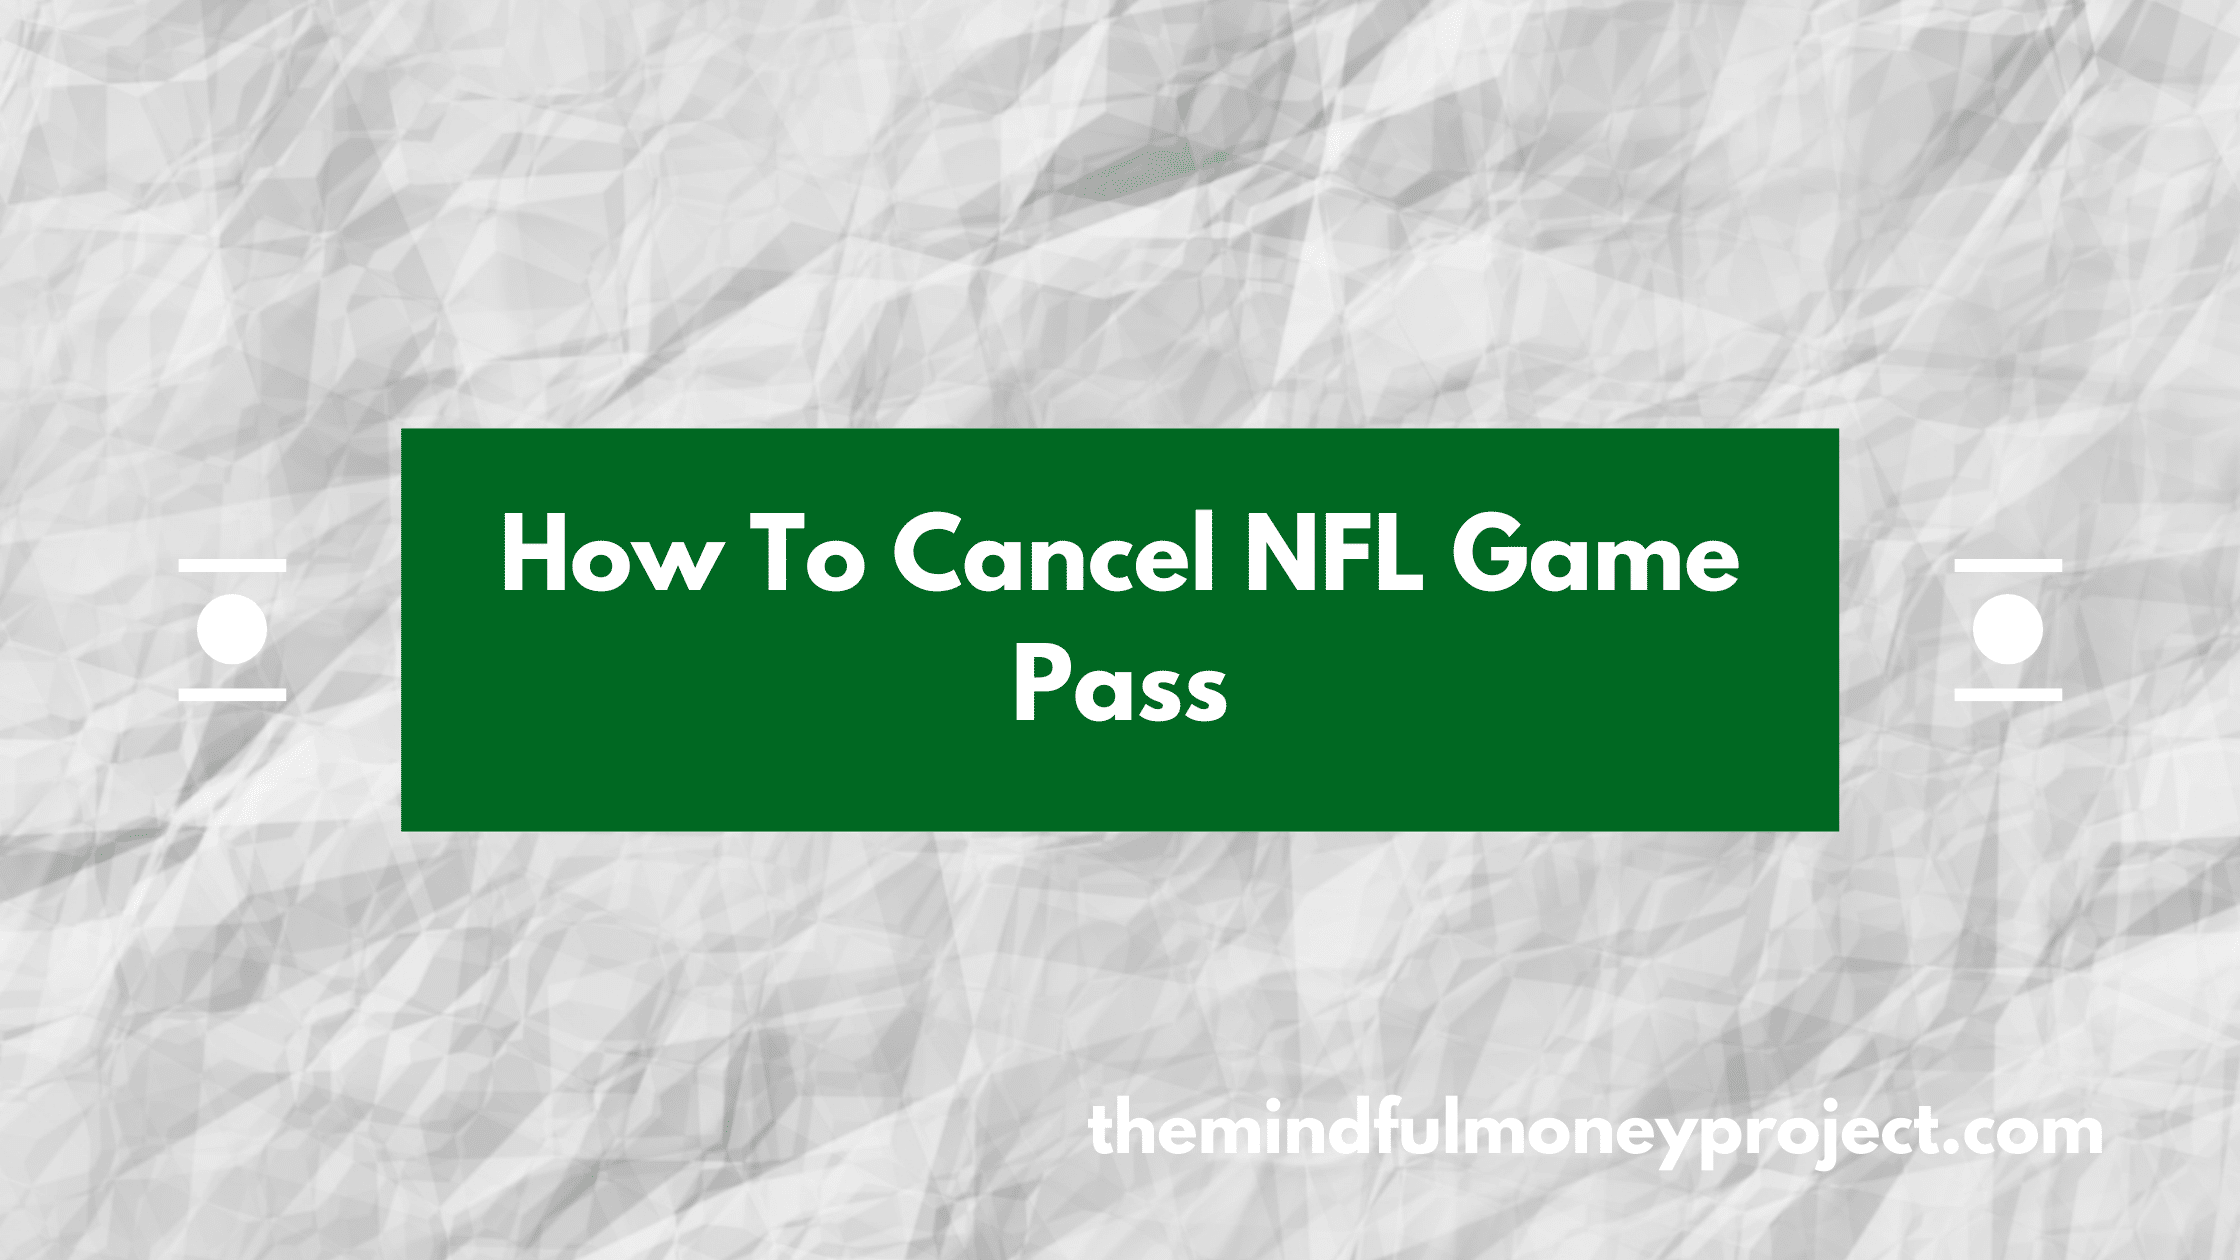 How To Cancel NFL Game Pass UK